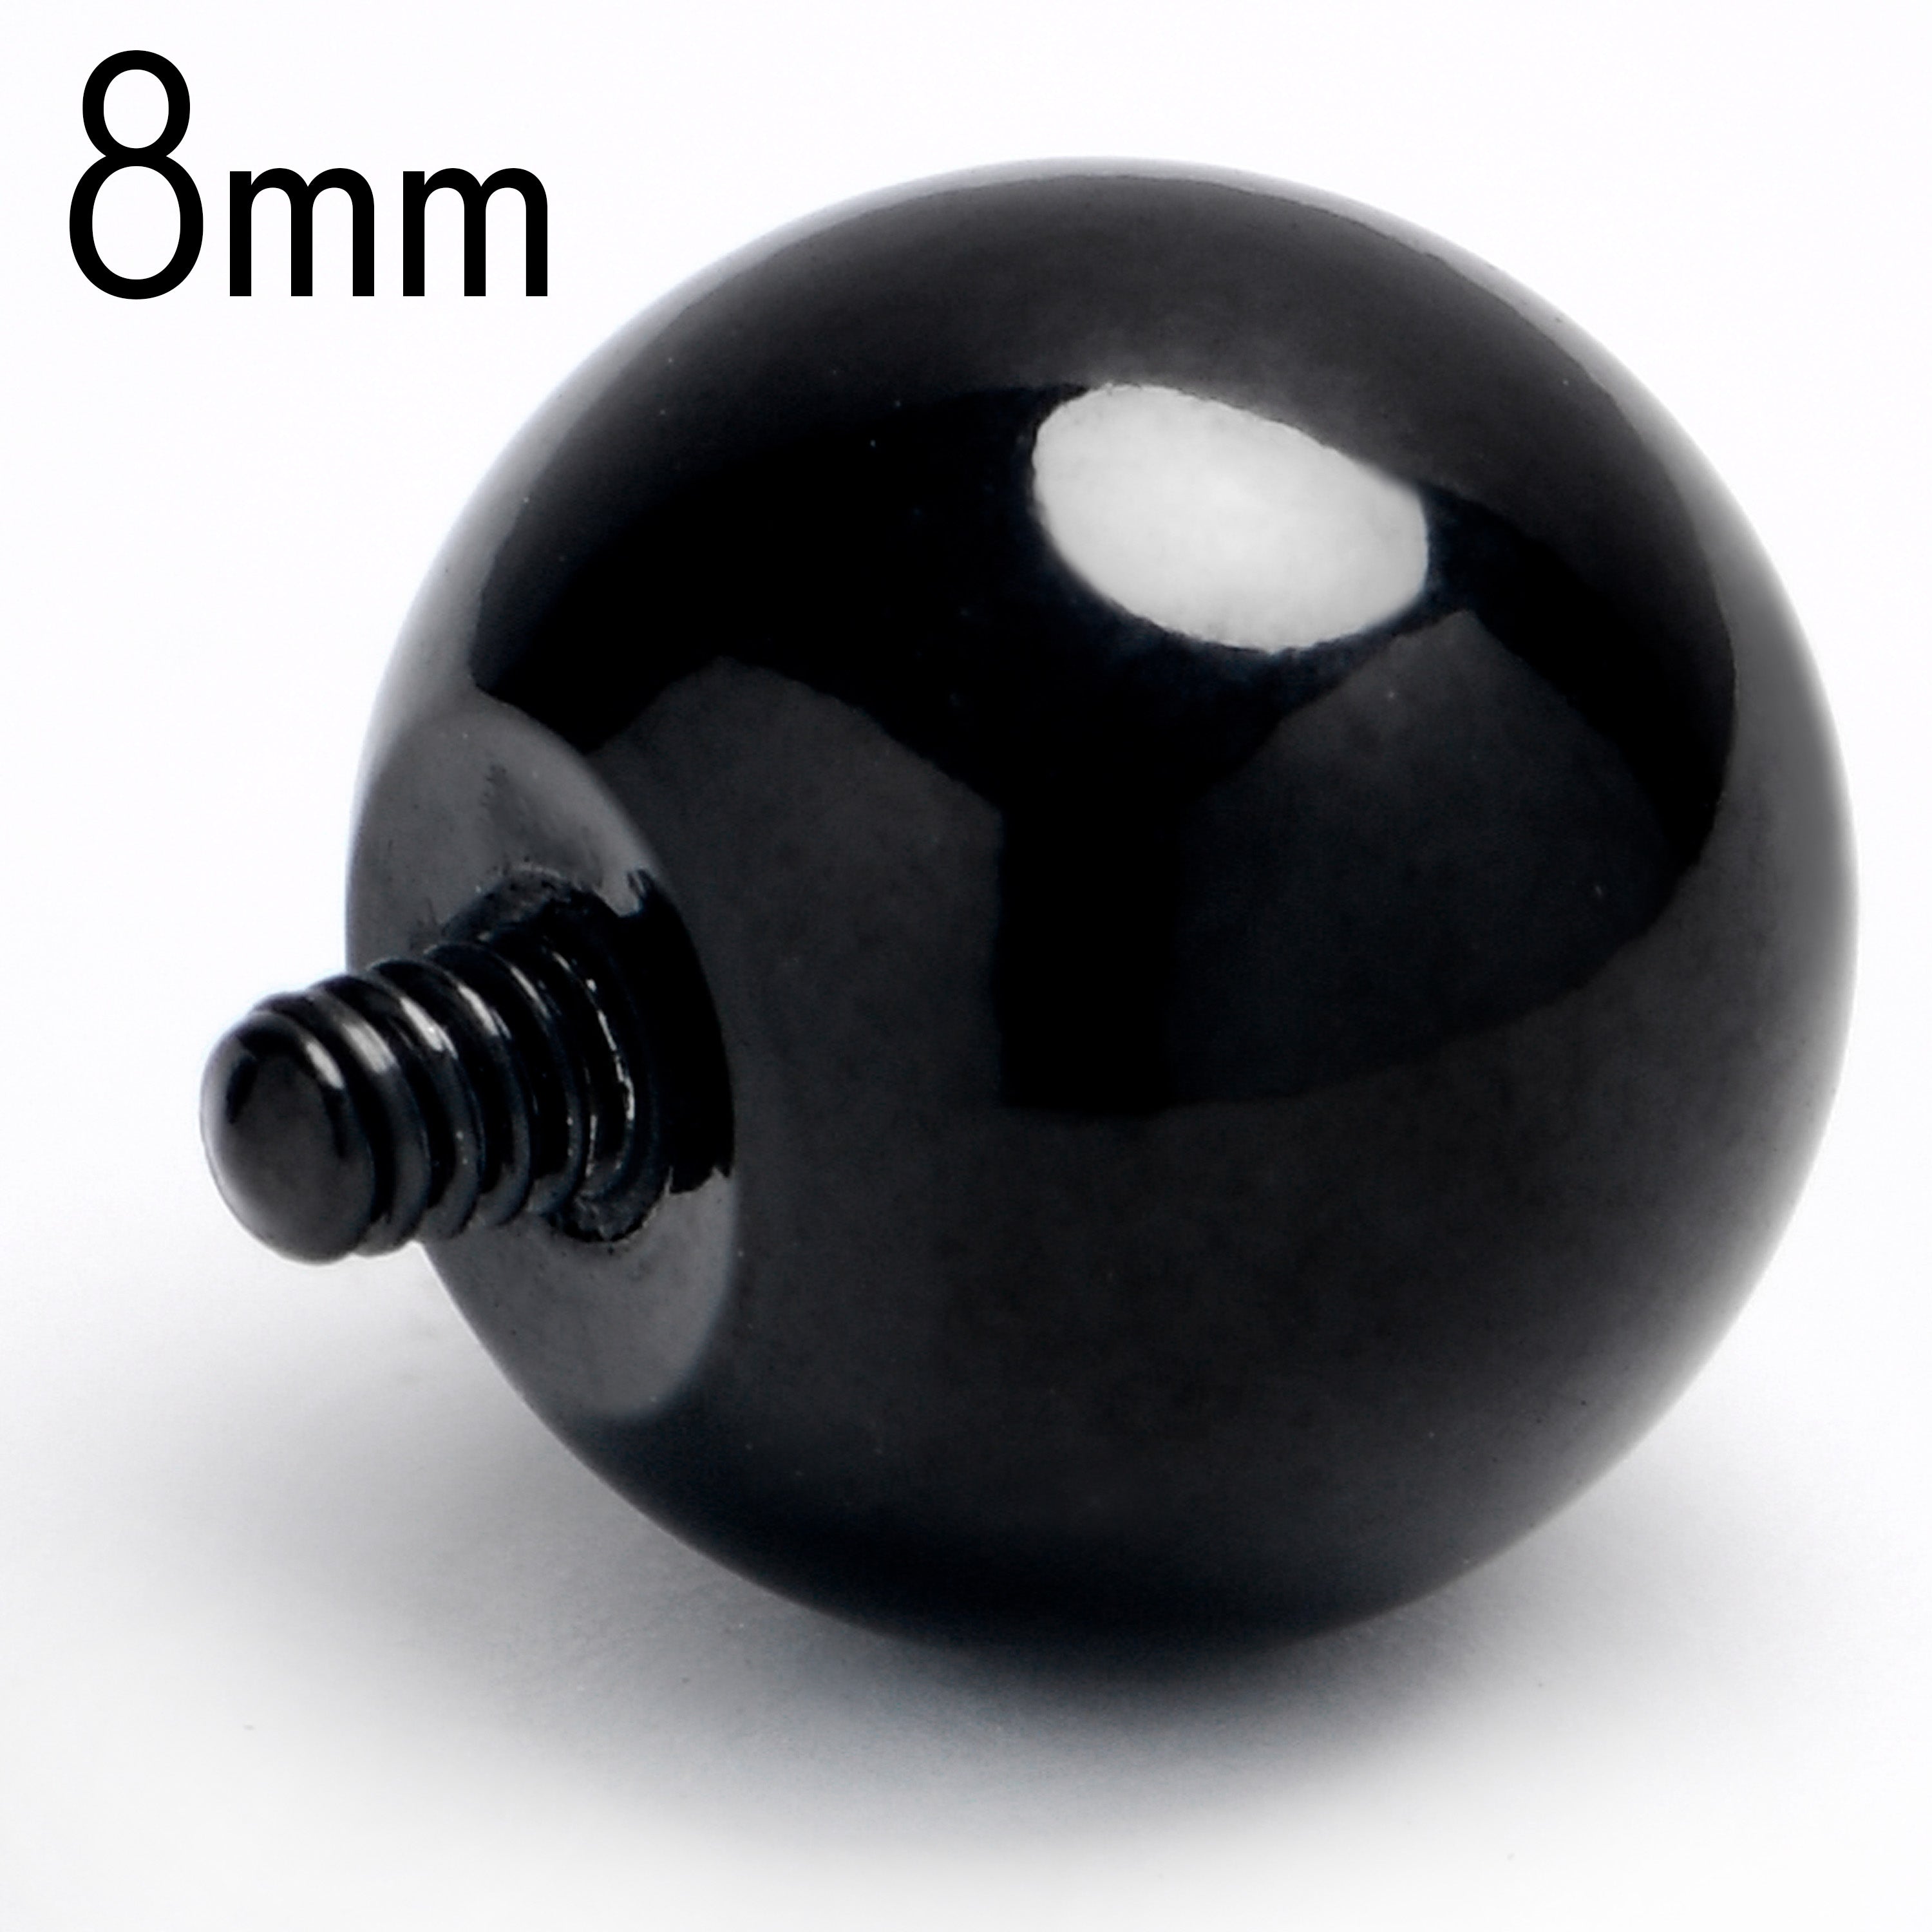 14 Gauge 8mm Black Replacement Ball End Internally Threaded Jewelry